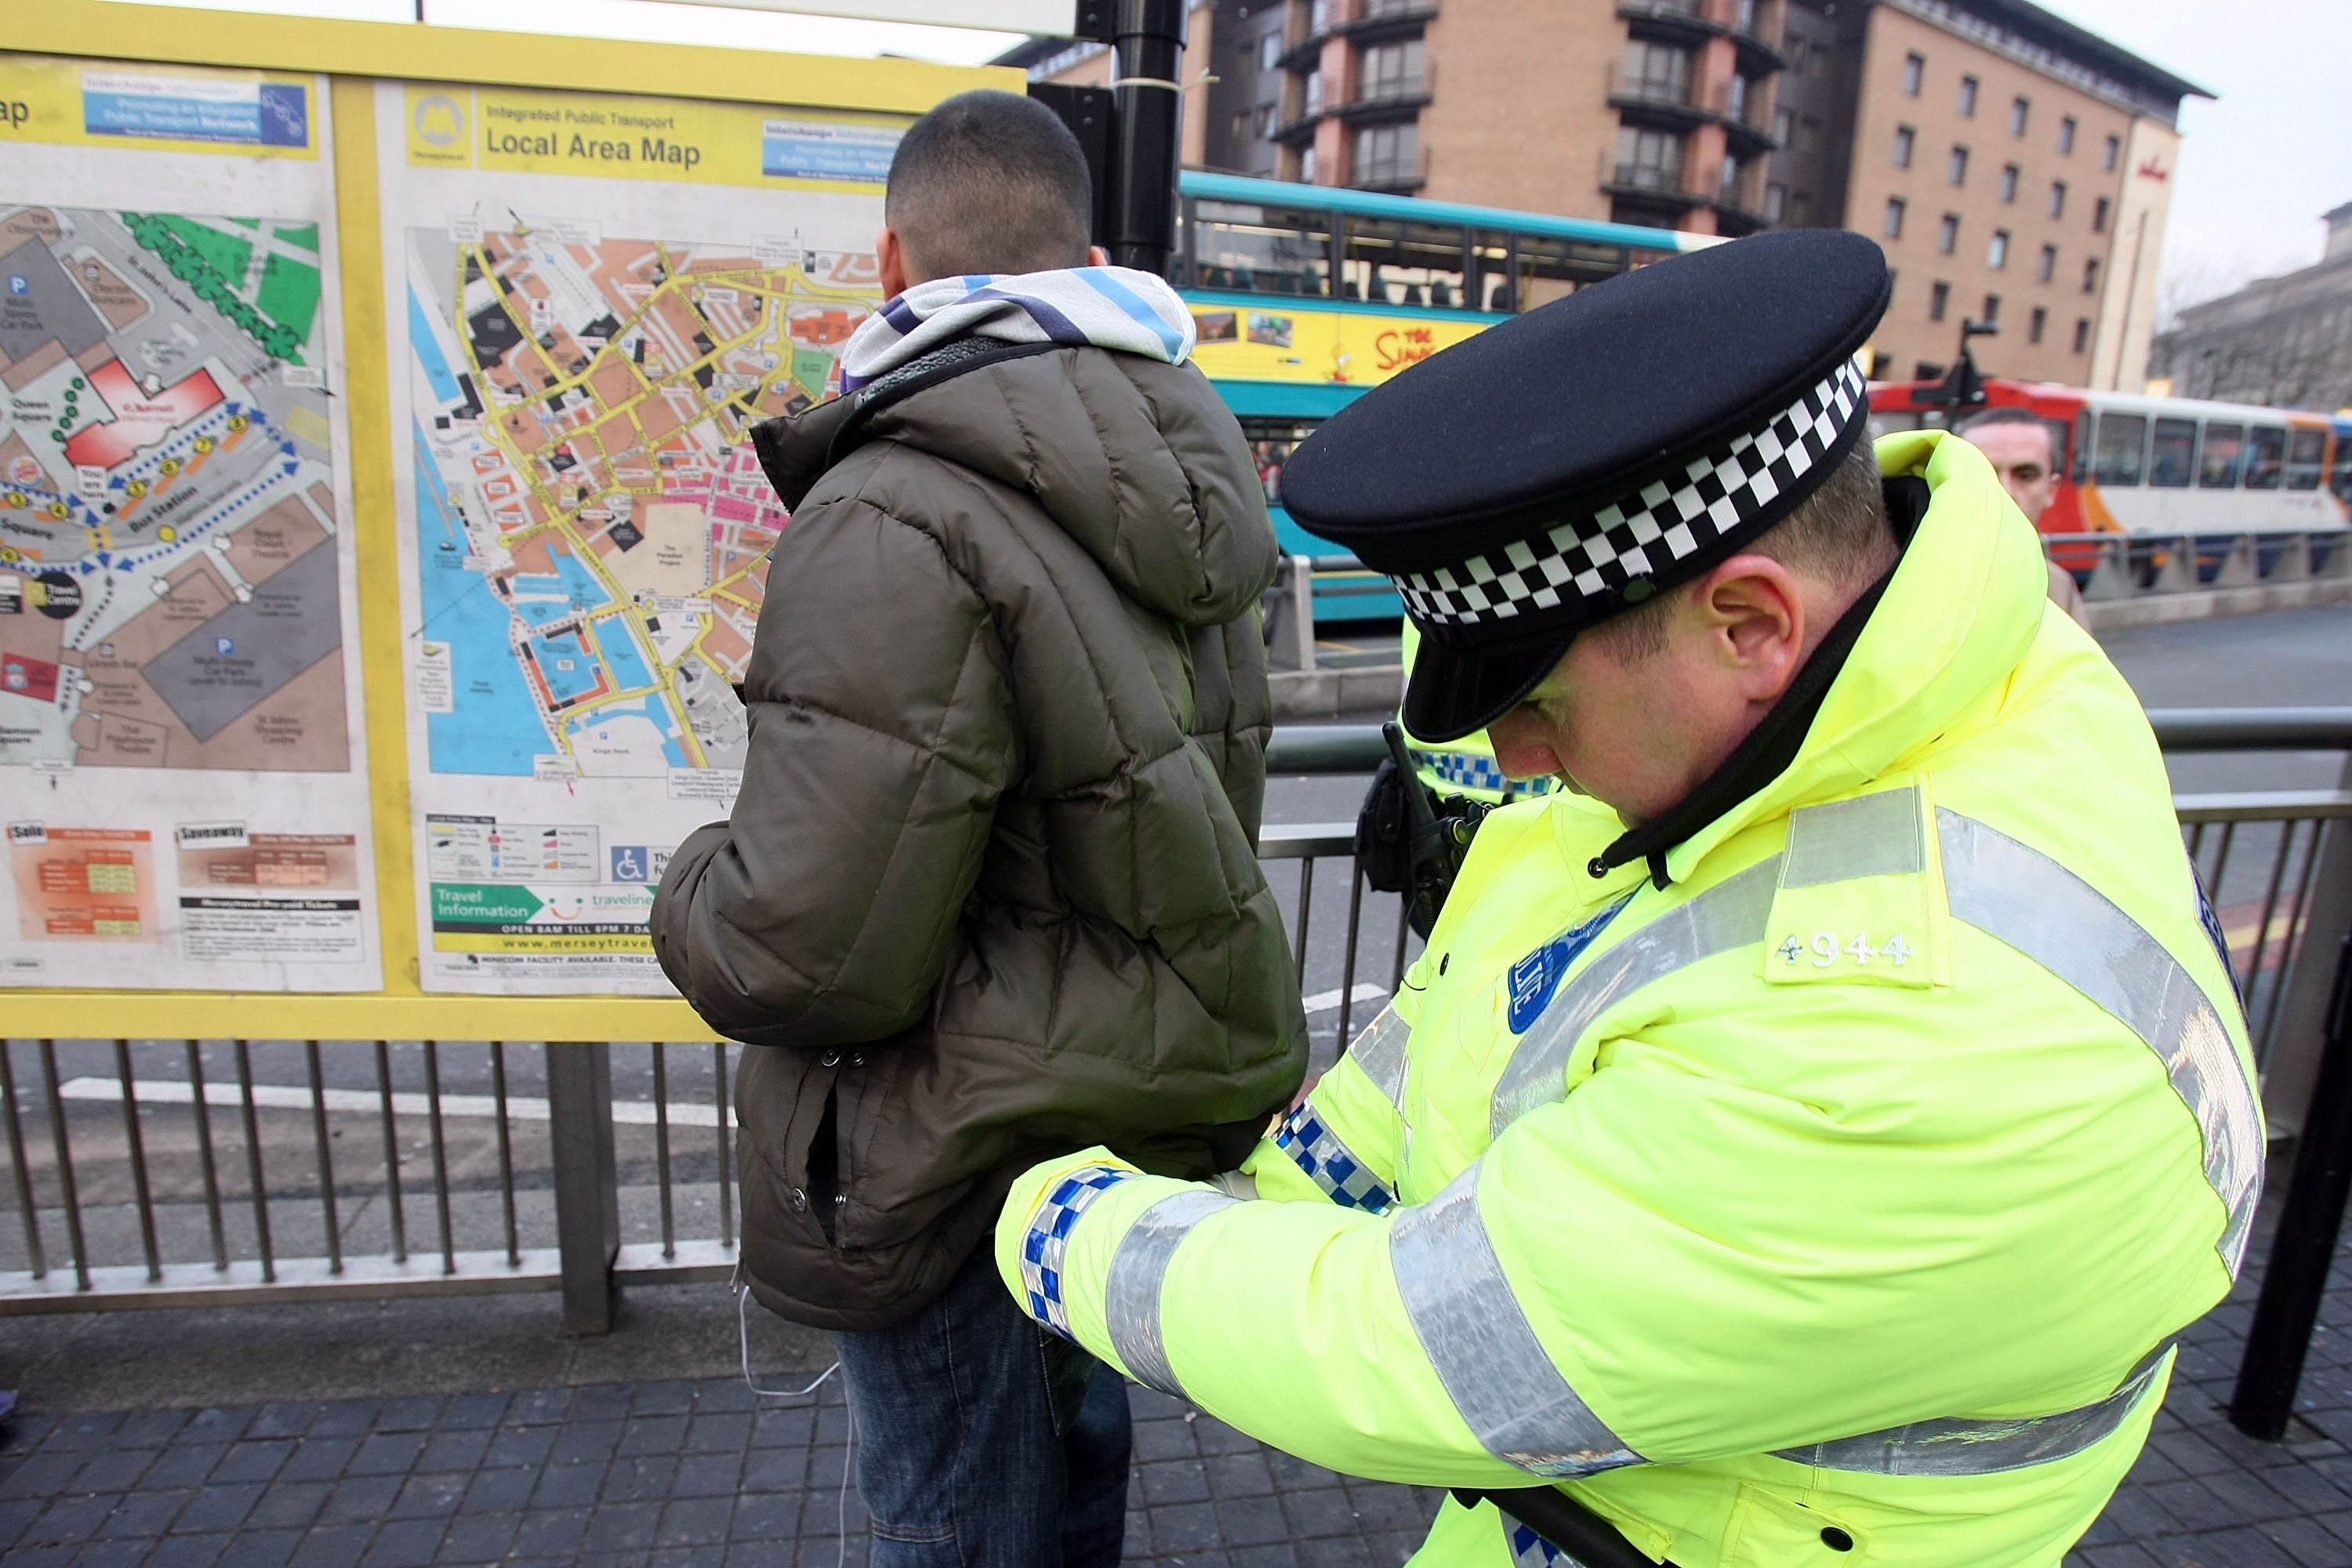 Charities questioned why the government was expanding stop and search and increasing other 'racially disproportionate' police powers